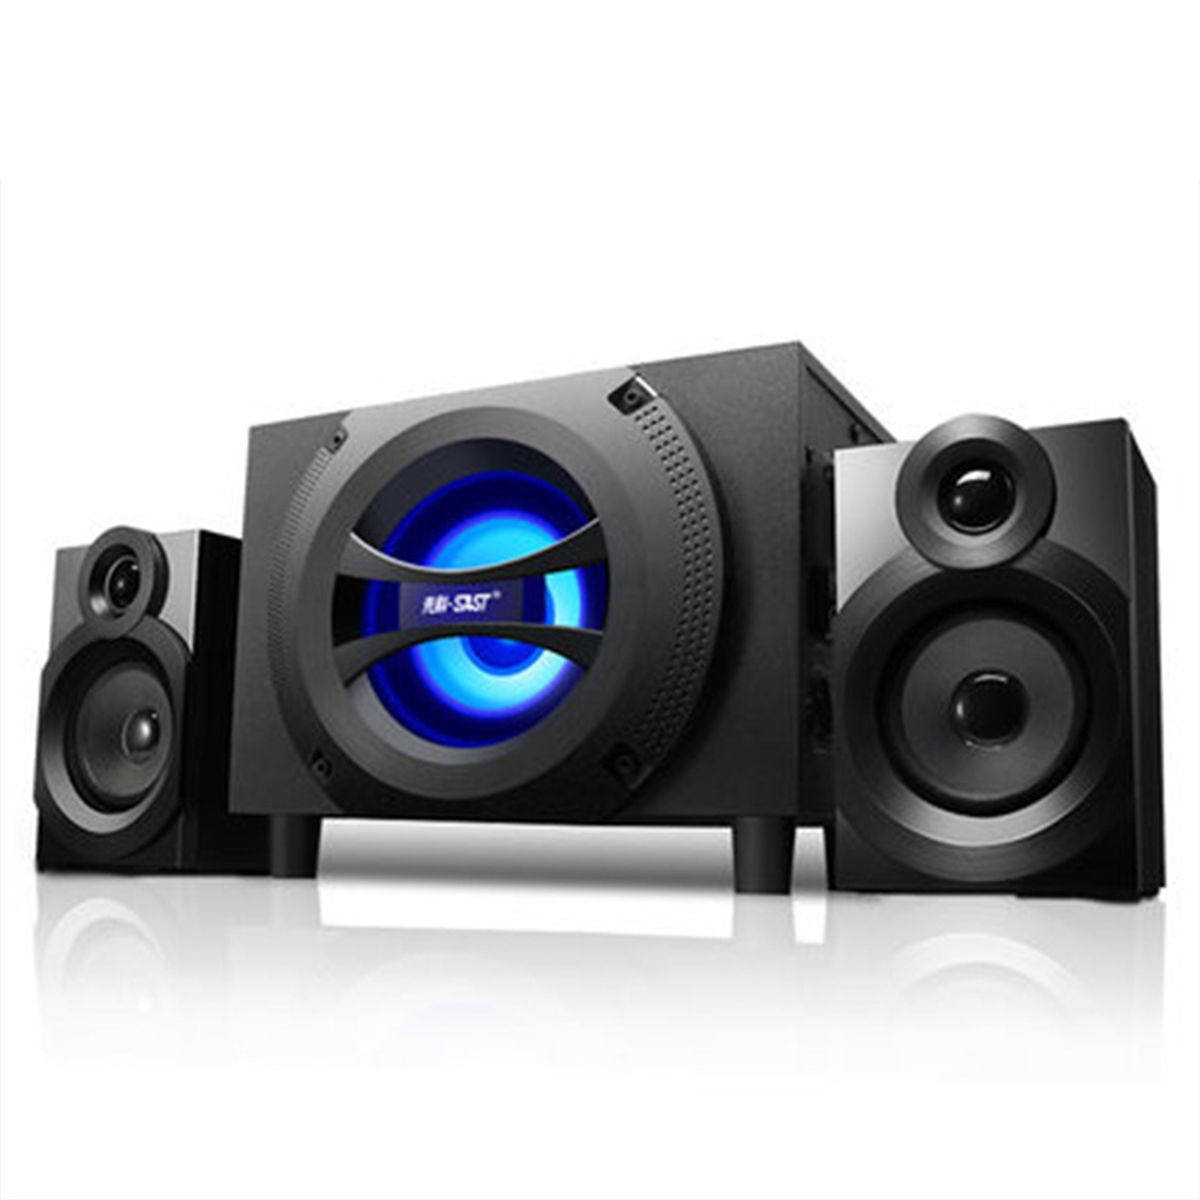 

SAST C2 2.1 Wooden Bass Subwoofer Speaker With 2pcs Coaxial Speakers Support AUX U Disk SD Card